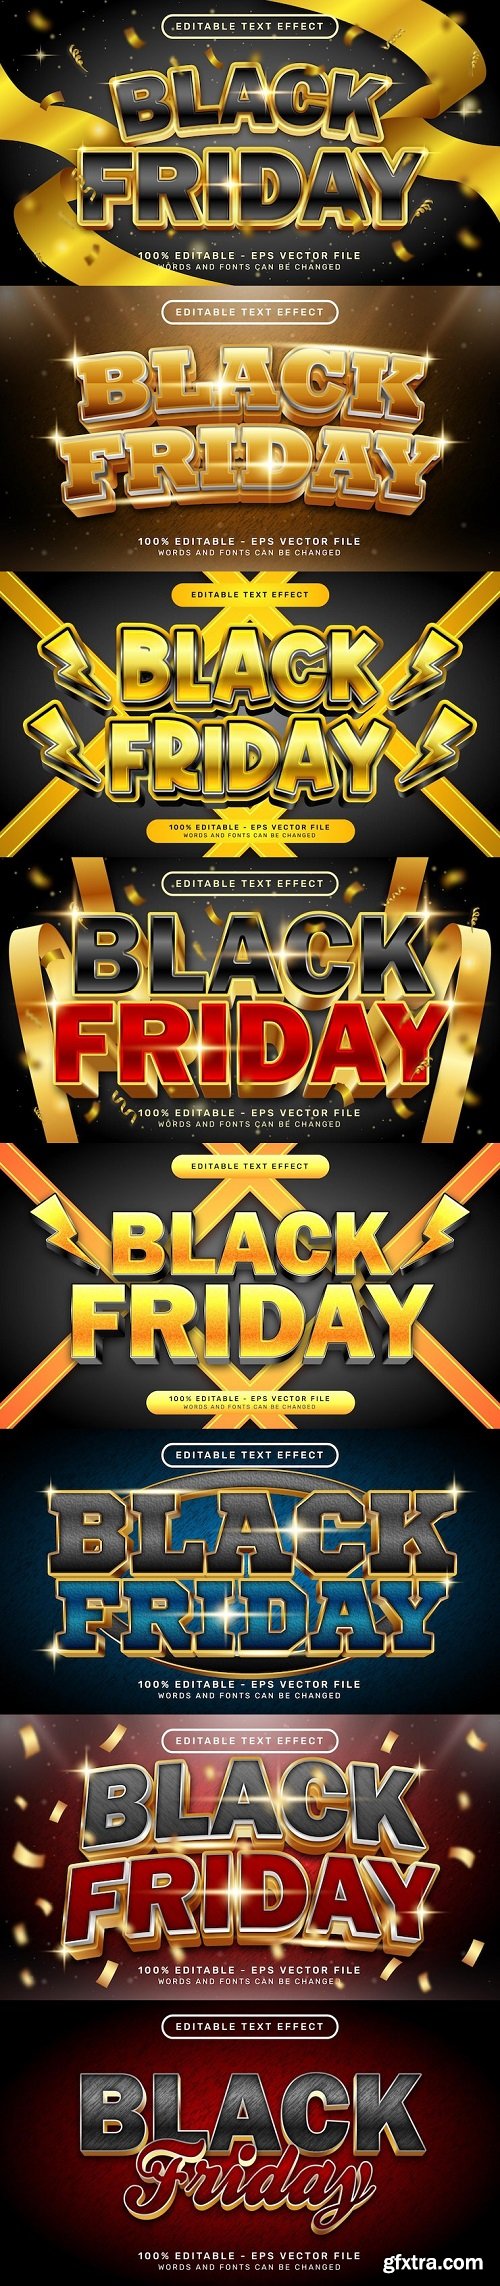 Black friday 3d text effect and editable text effect